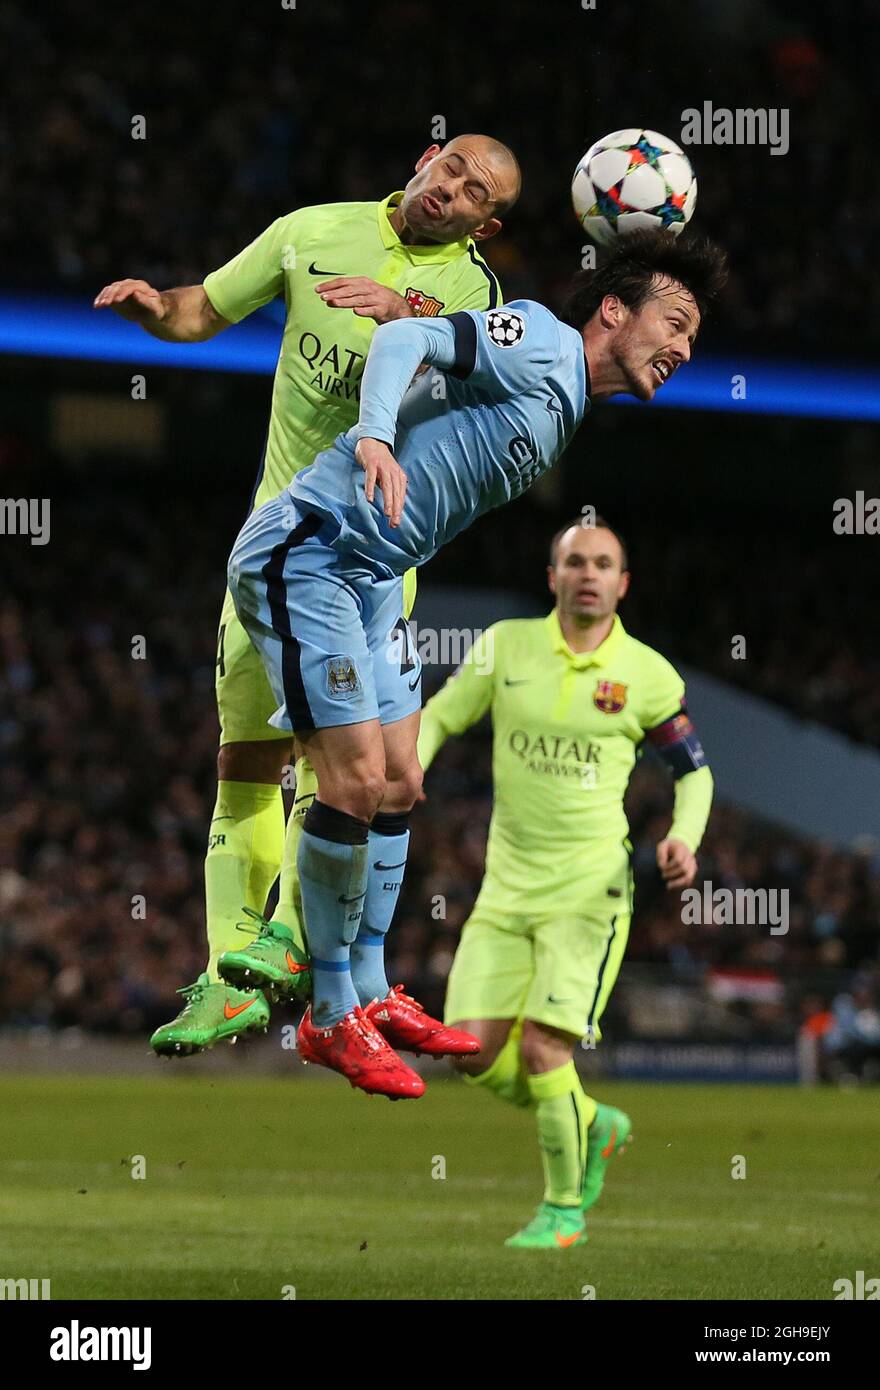 Javier Mascherano of Barcelona challenges David Silva of Manchester City during the UEFA Champions League Round of 16 match between Manchester City and Barcelona at the Etihad Stadium, London on 24th February 2015. Stock Photo